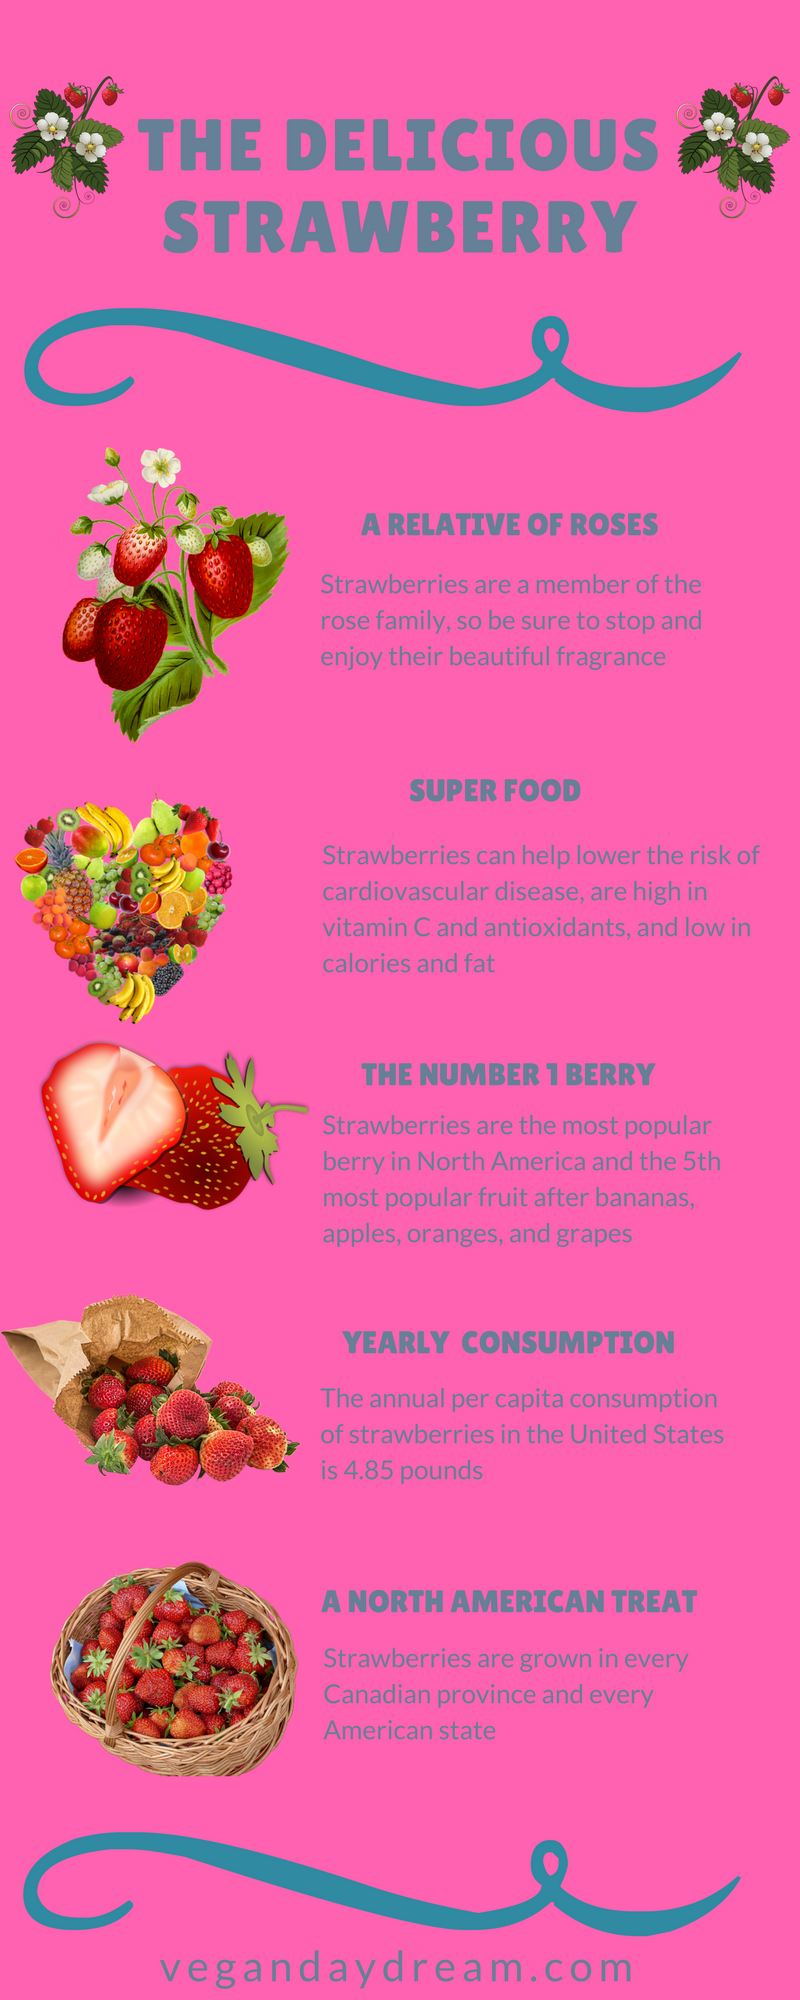 The Delicious Strawberry Information